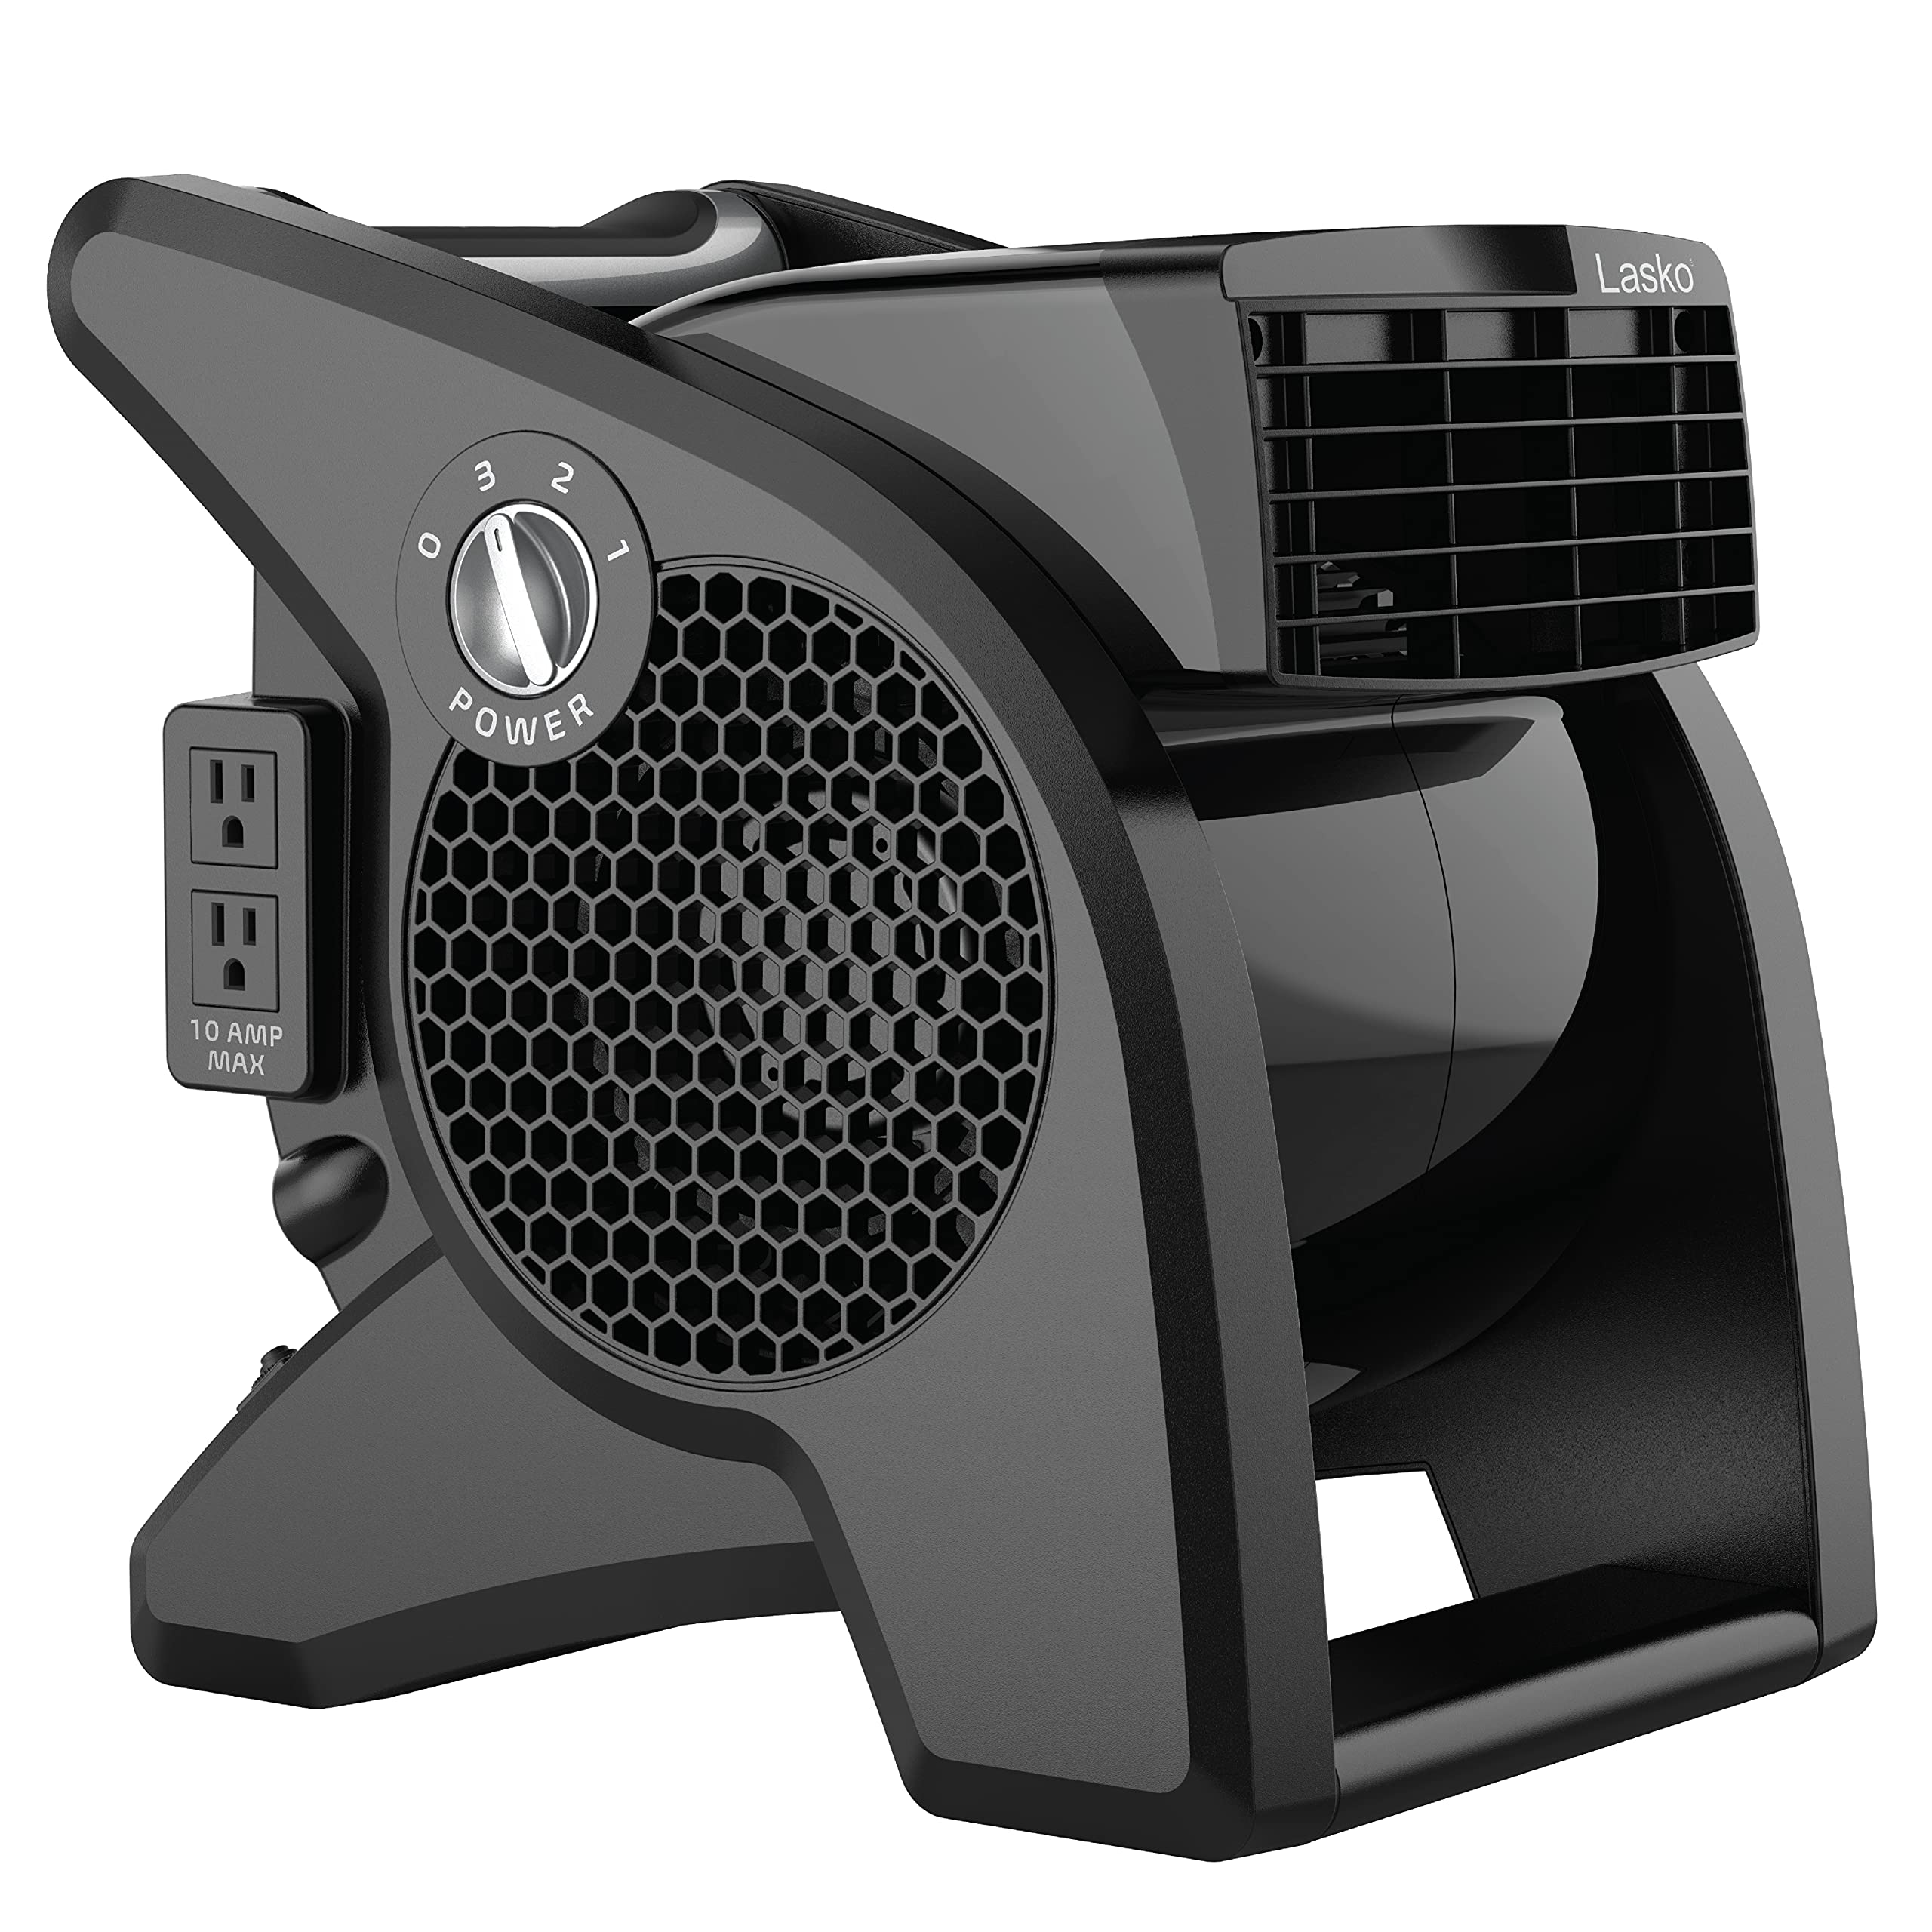 Lasko High Velocity X-Blower Air Mover Utility 3-Speed 6-Position Fan, 11x9x12, Blue & High Velocity Pro-Performance Pivoting Utility Fan for Cooling, Ventilating, Black Grey U15617